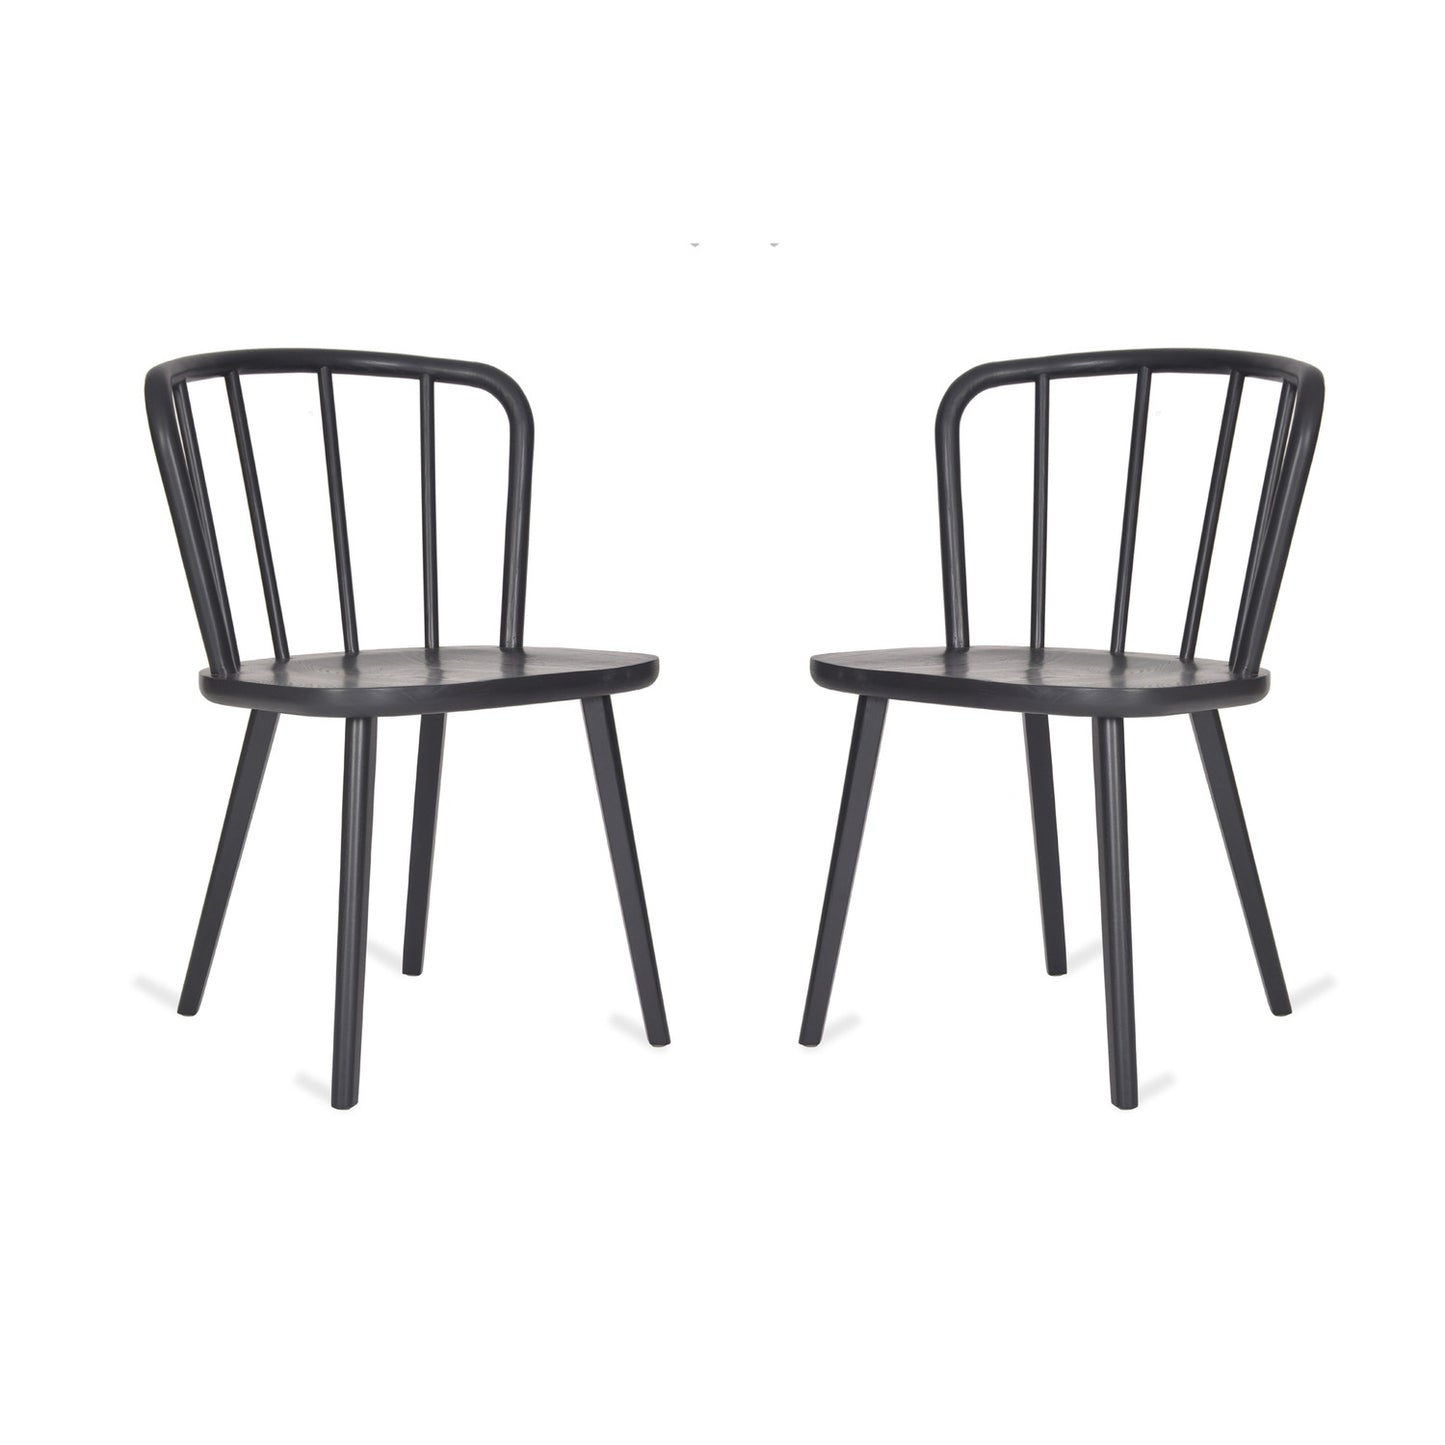 Pair of Uley Chairs in Carbon by Garden Trading - Ash